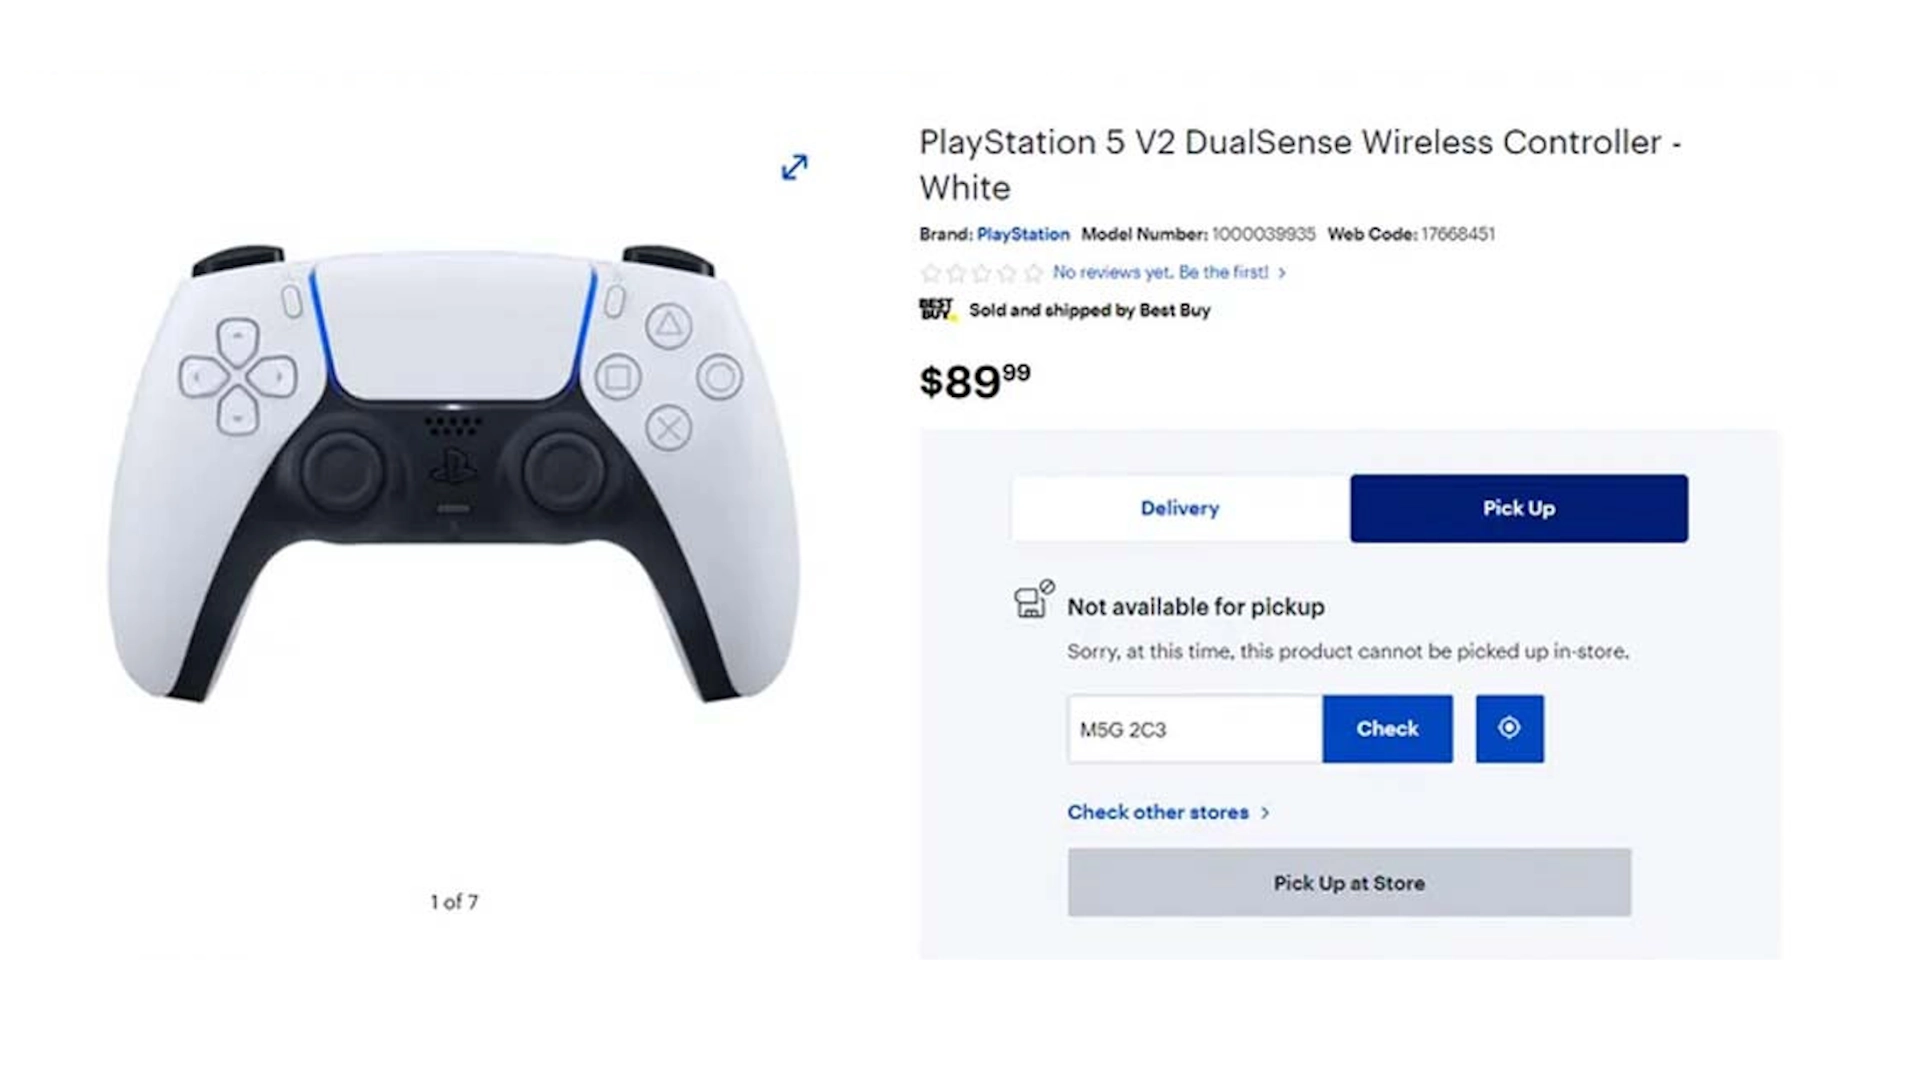 The Sony DualSense V2 controller appeared on the shopping site with twice the battery capacity of its predecessor